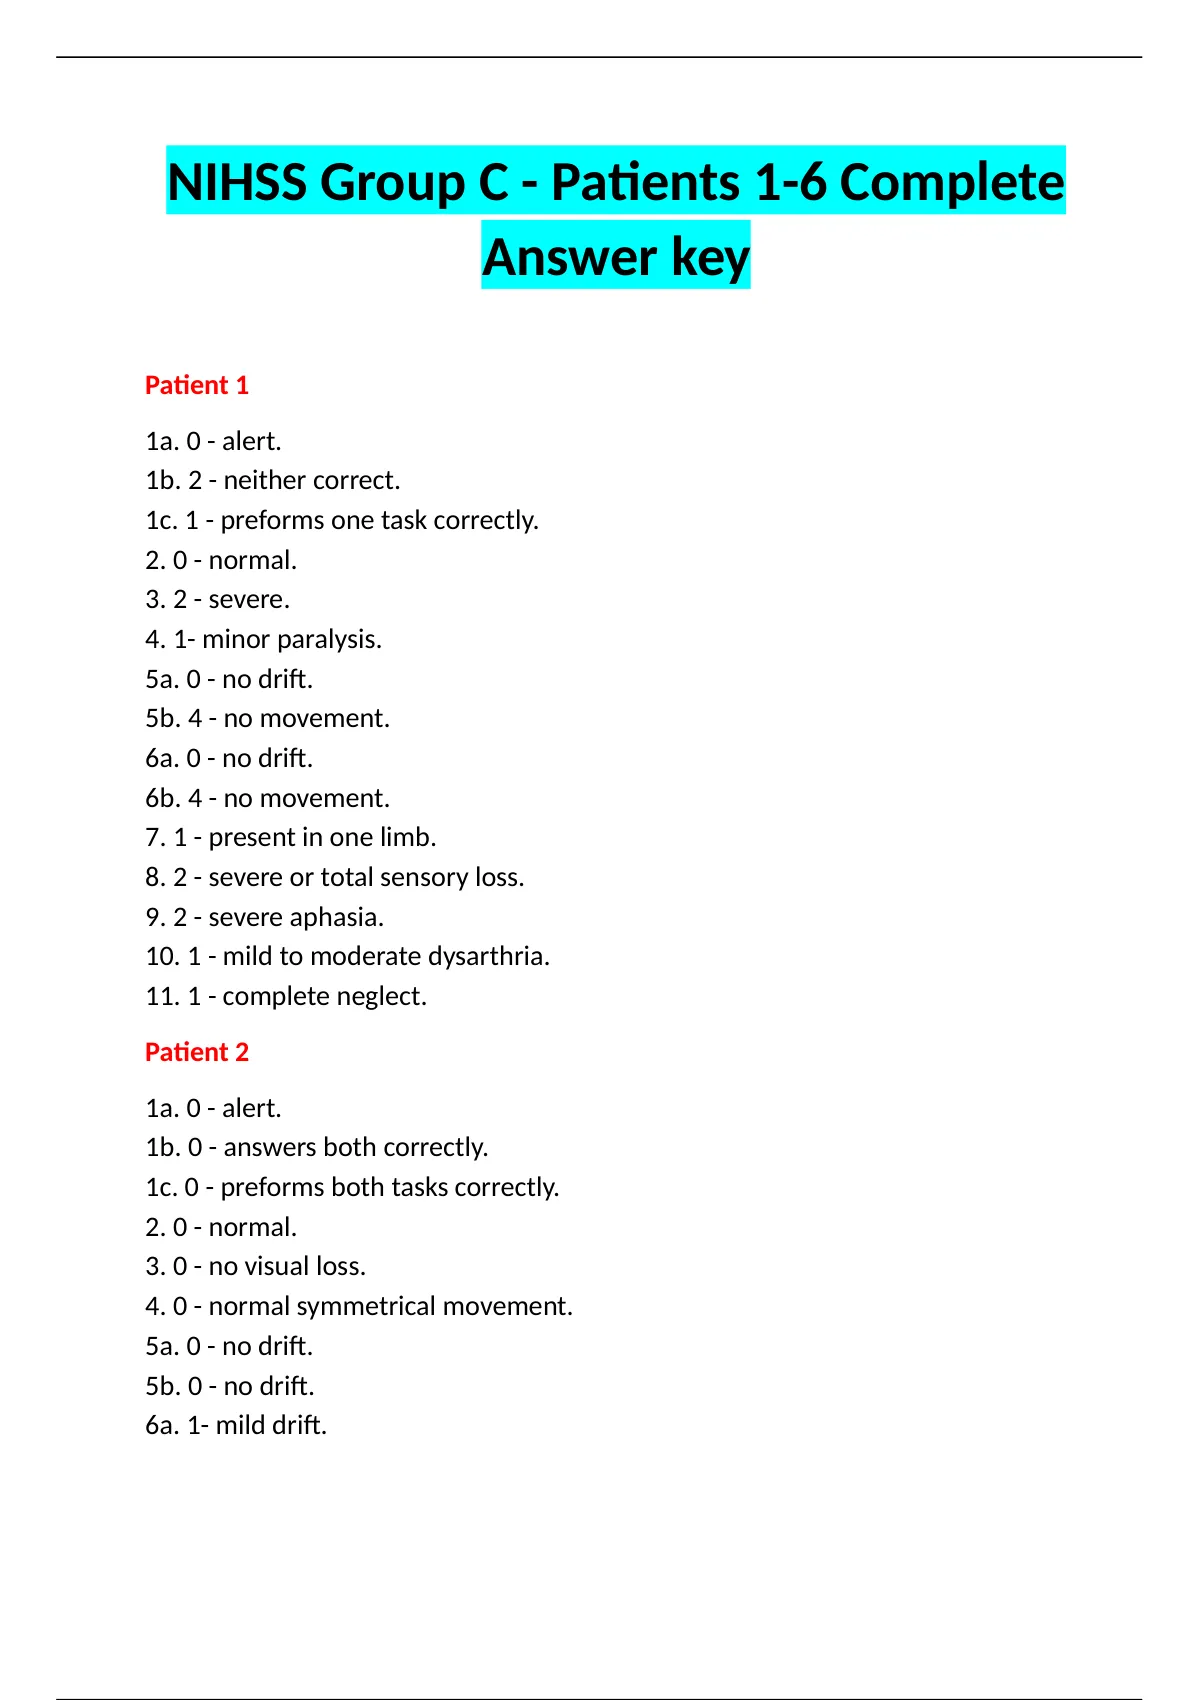 NIHSS Group C Patients 16 Complete Answer key NIH Stroke Scale